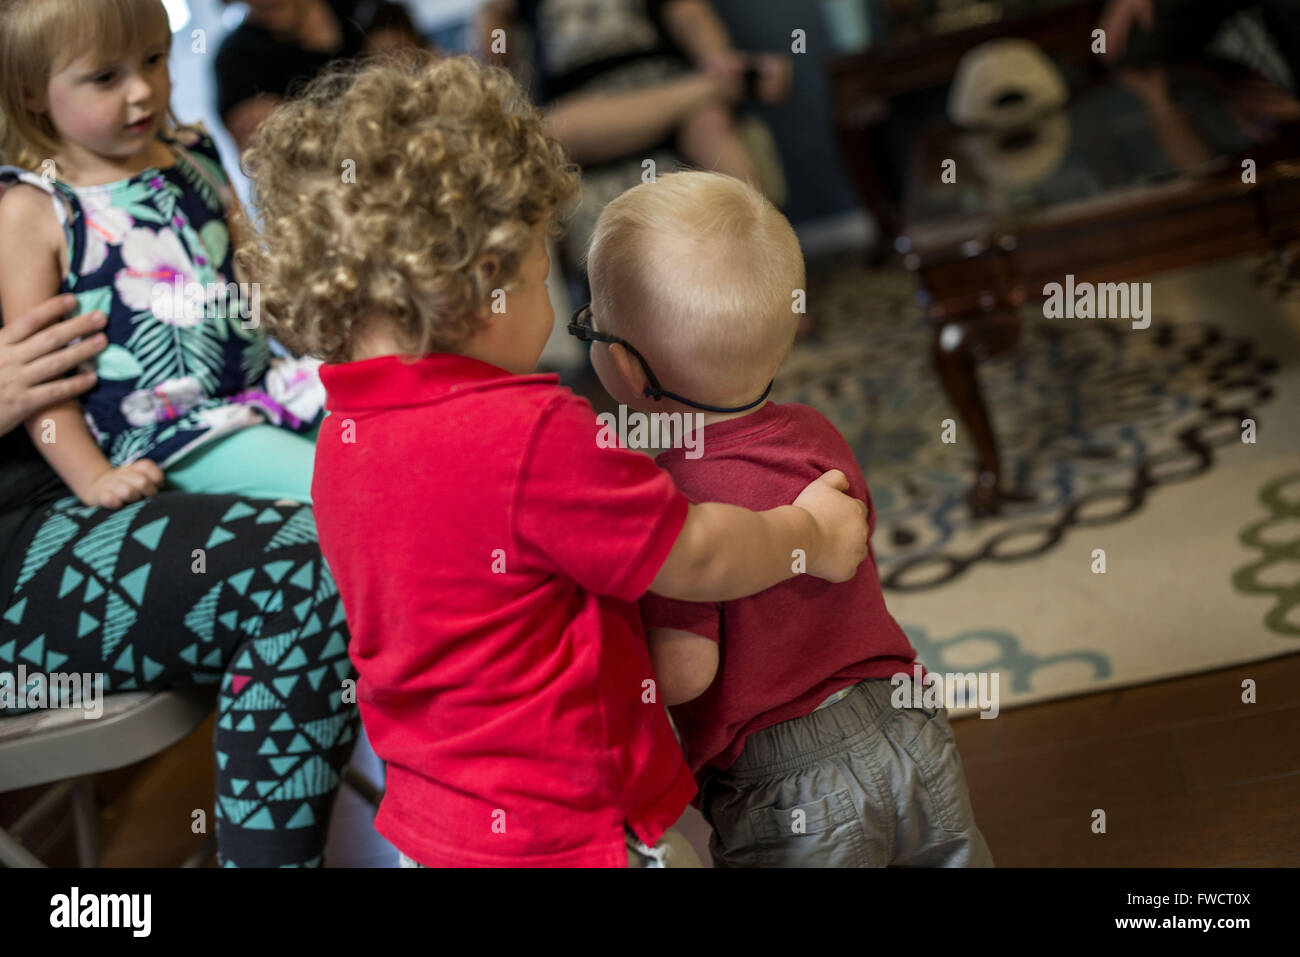 La Habra, California, USA. 3rd Apr, 2016. BRAXTON CHAMBERS, 20 months old, of Placentia, California, hugs his cousin, RHYS CHAMBERS, also 20 months, of La Habra, California, during a family birthday party for RHYS's older sister, DELANEY CHAMBERS, 4, top left. © Bruce Chambers/ZUMA Wire/Alamy Live News Stock Photo